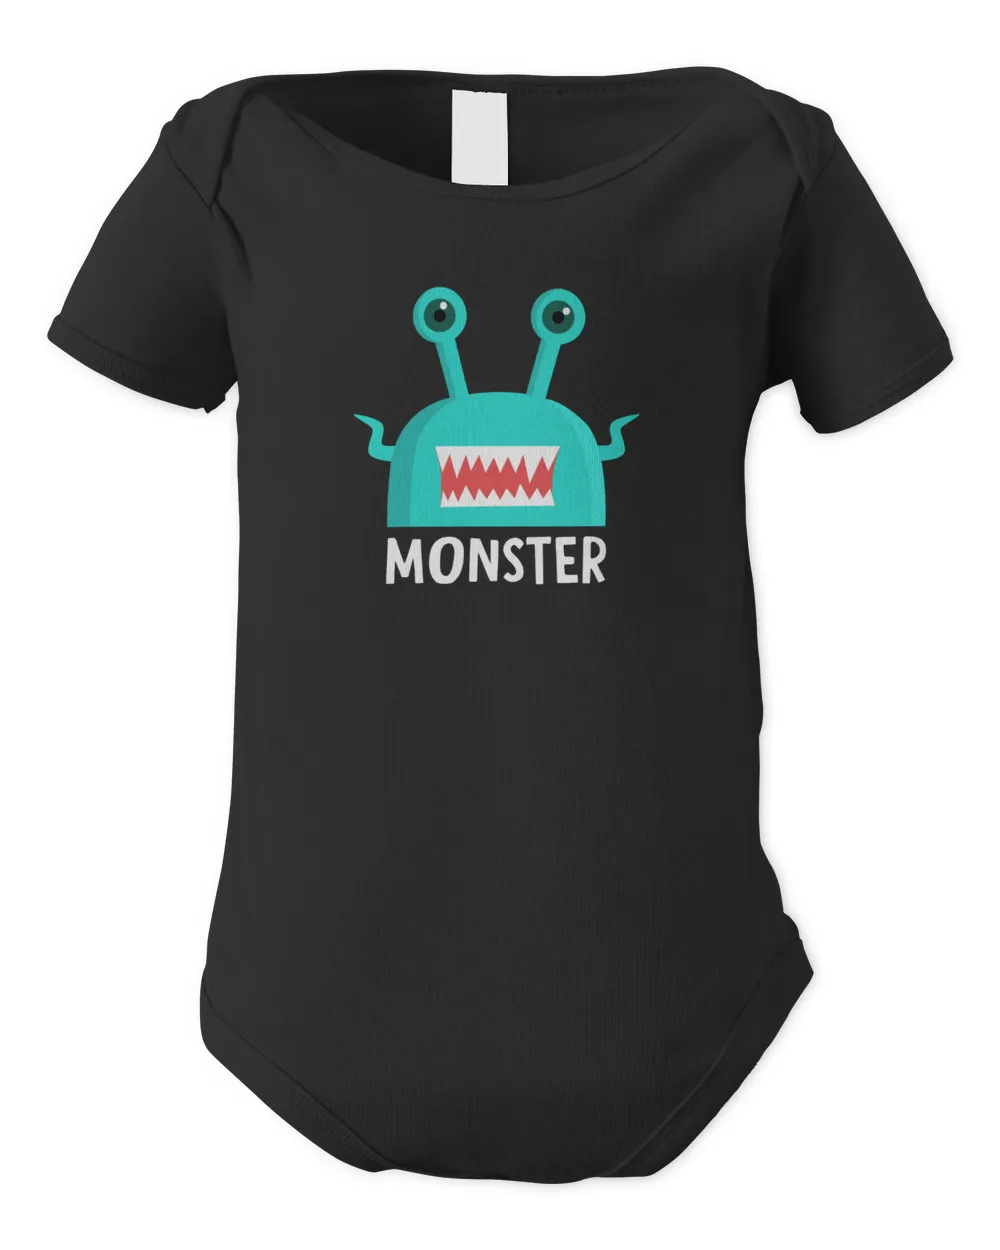 Monster Baby Bodysuit Outfit